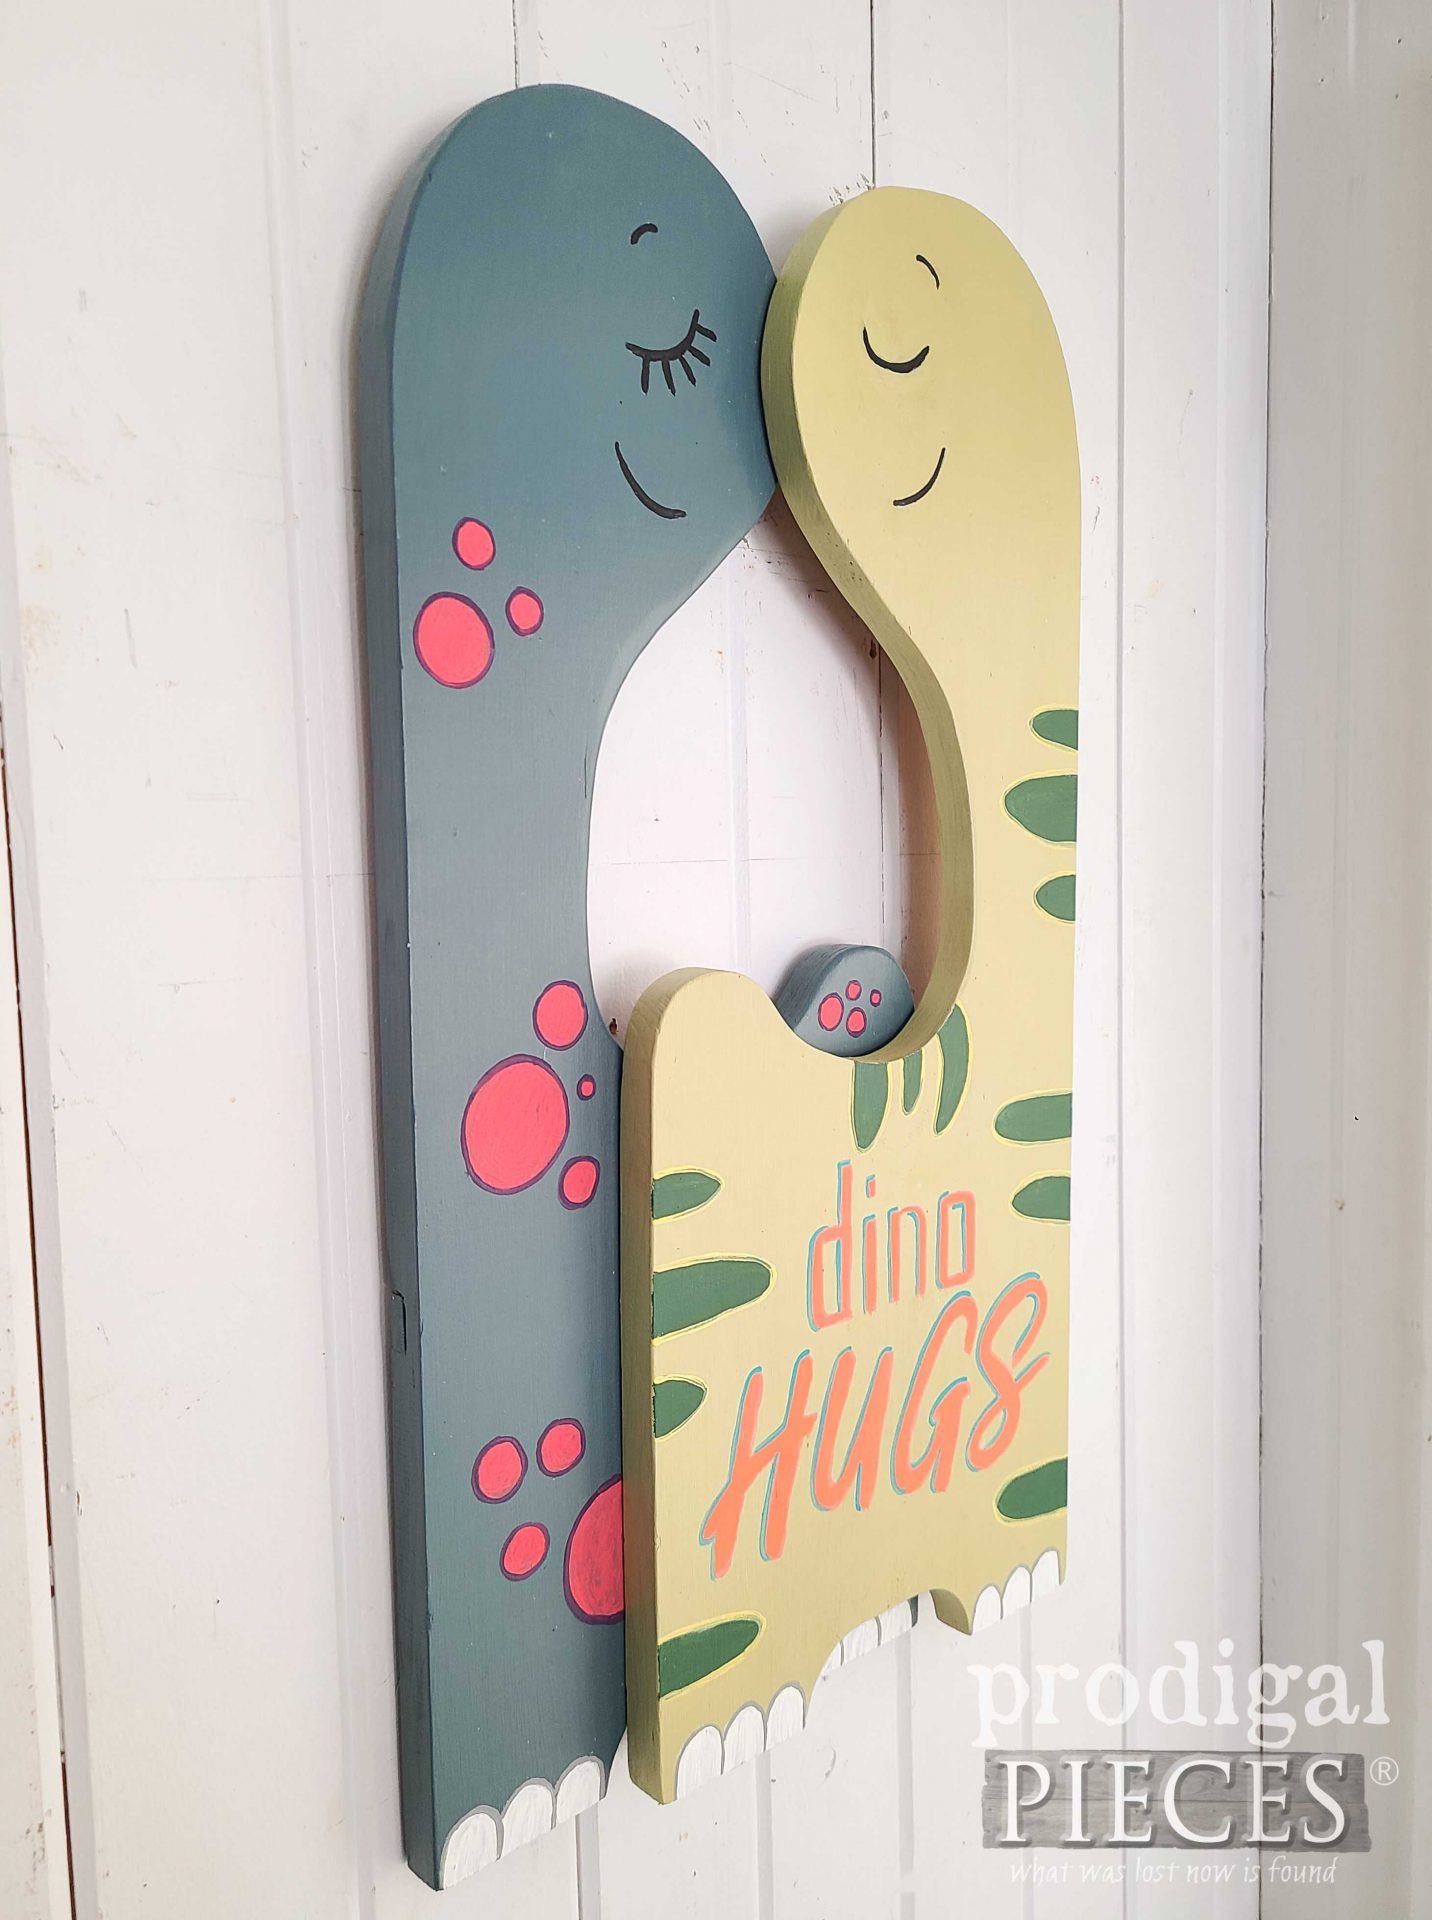 Side View of Cute Dinosaur Sign from a Heart Cut-Out Furniture Upcycle by Larissa of Prodigal Pieces | prodigalpieces.com #prodigalpieces #dinosaur #nursery #kids #homedecor